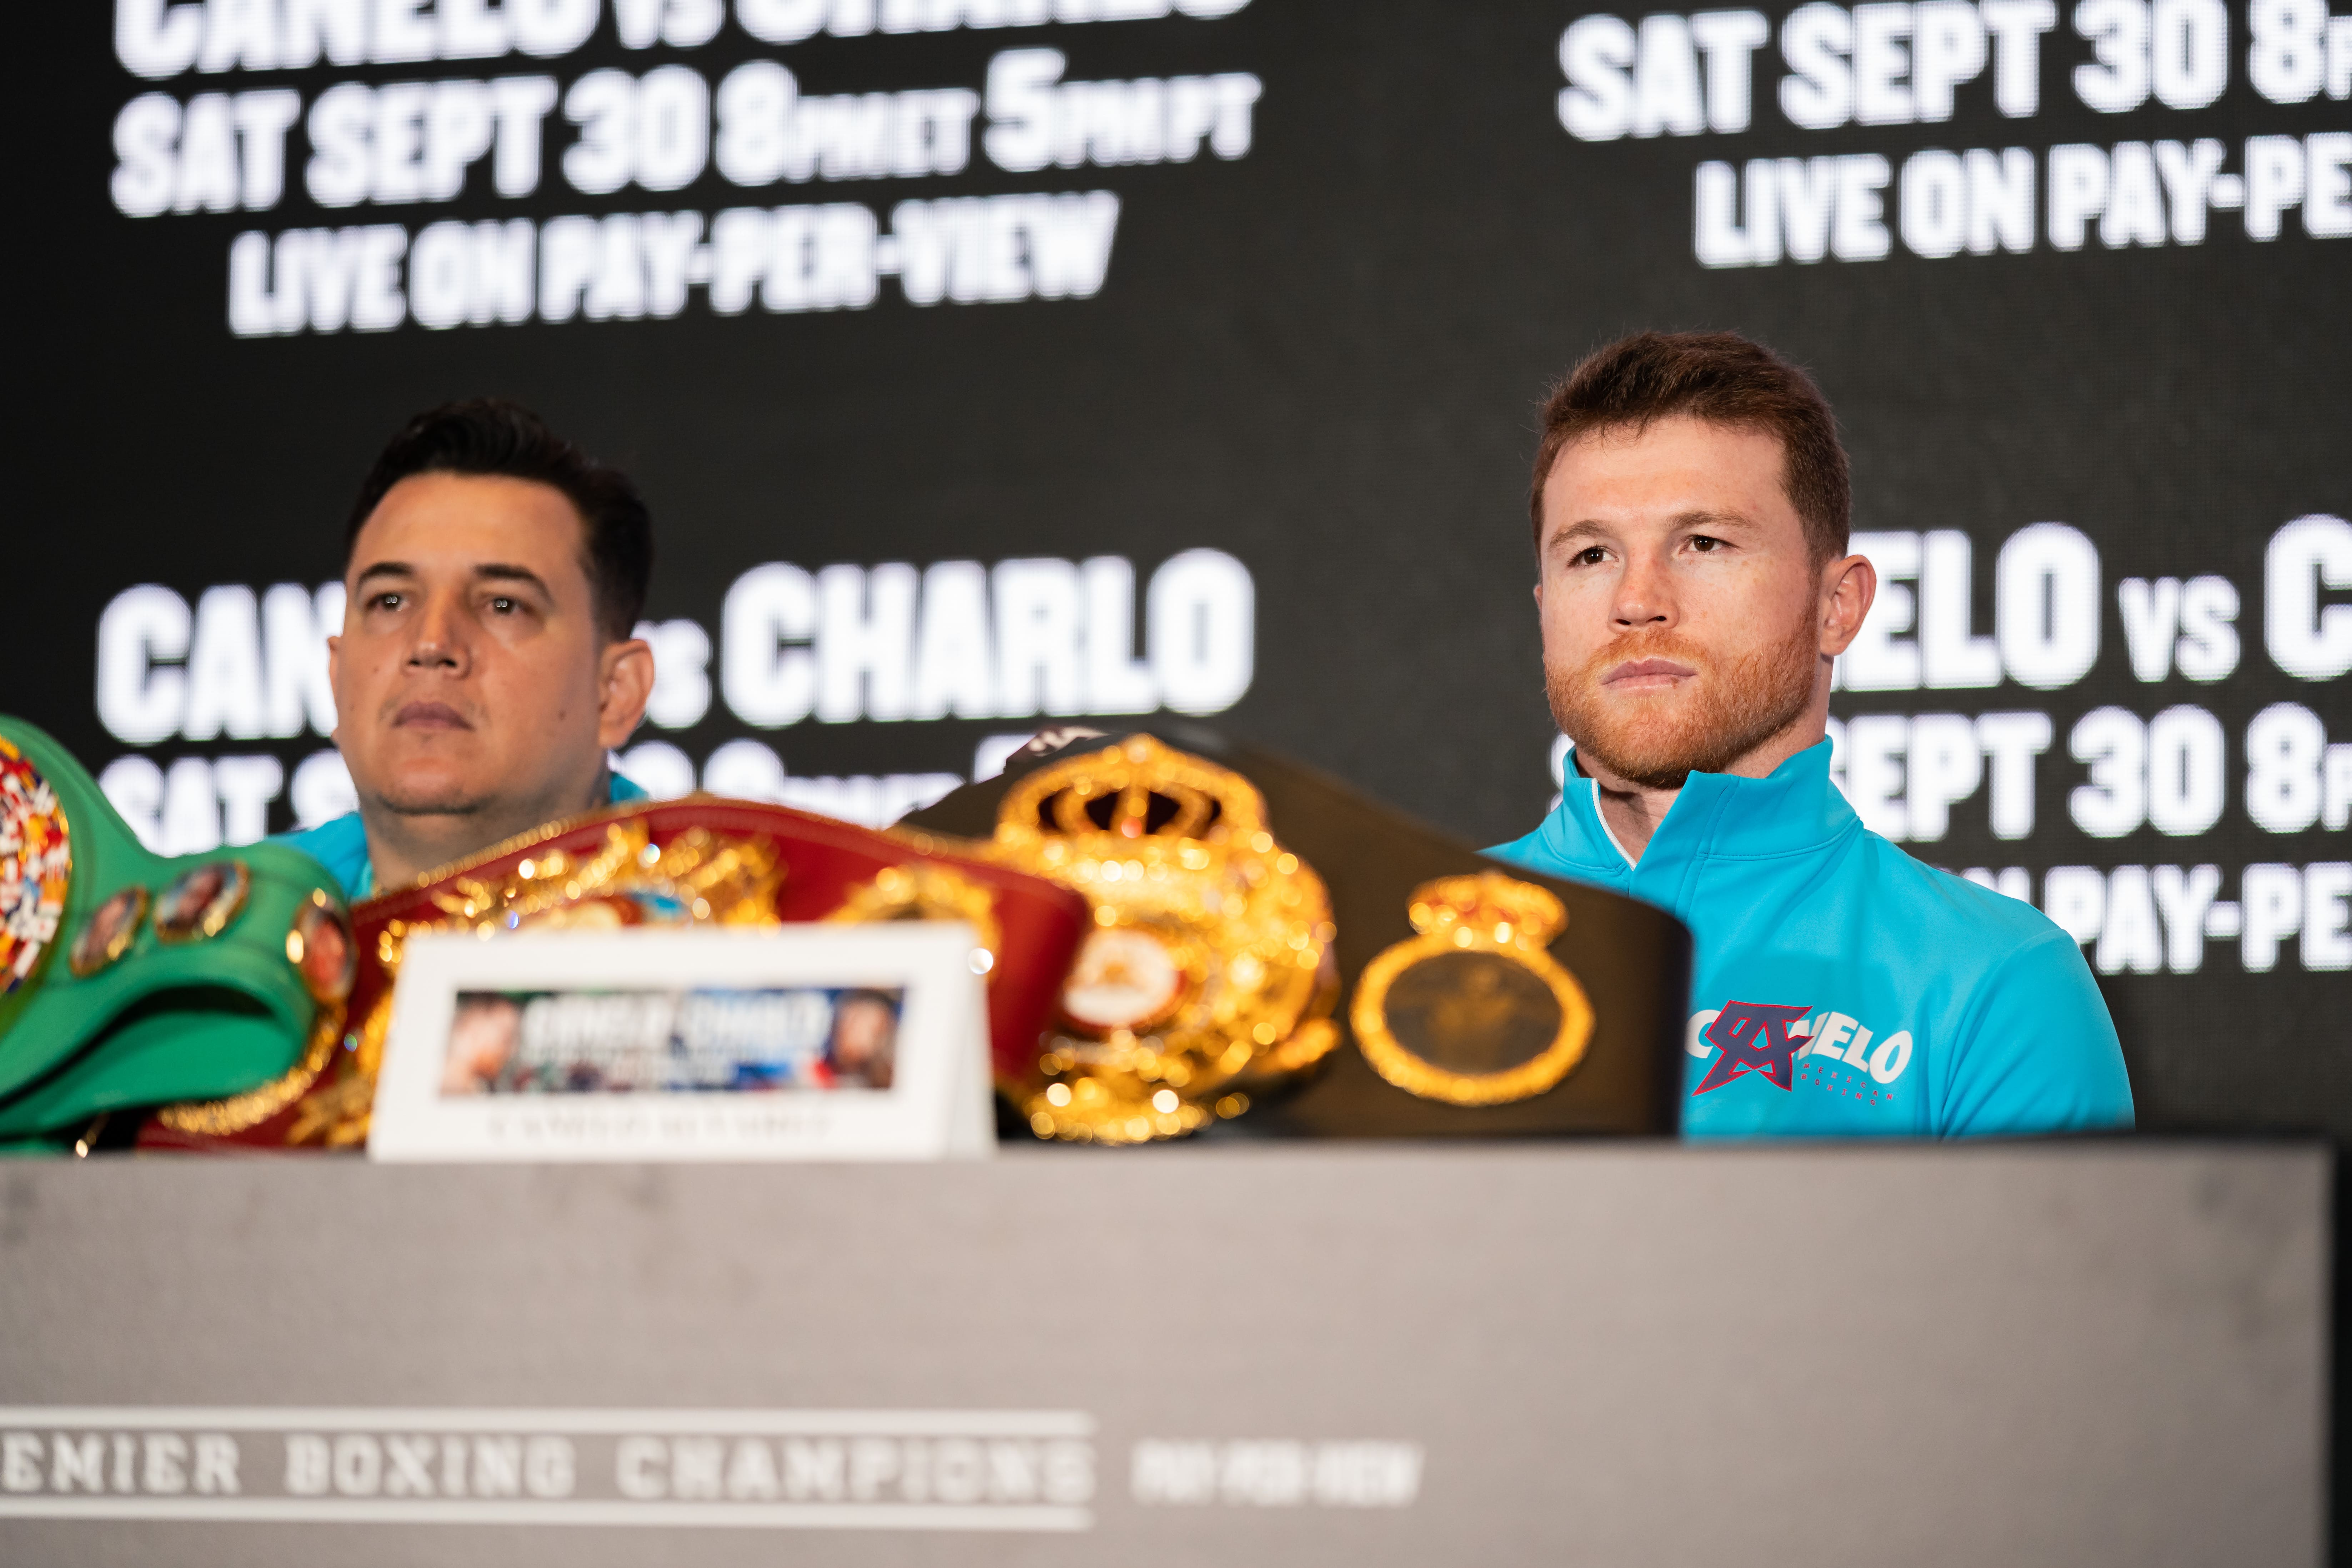 Canelo on Charlo moving up two-weight clases to face him: 'He took that challenge like I took that challenge before'